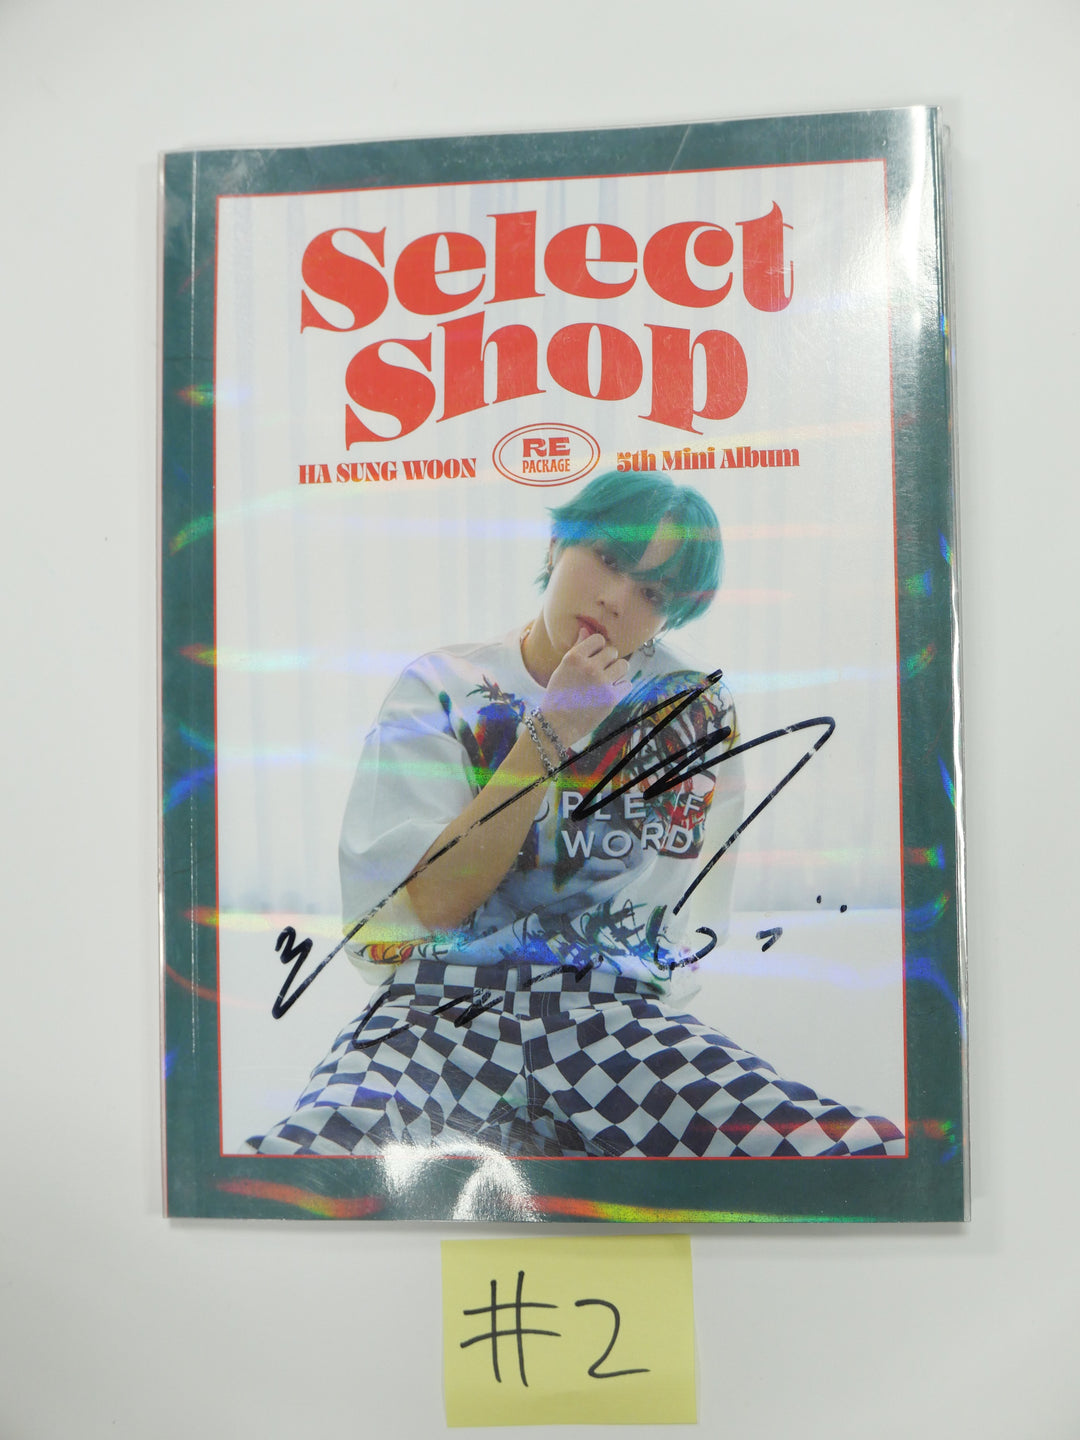 Ha Sung woon "Select Shop" 5th Mini - Hand Autographed (Signed) Album